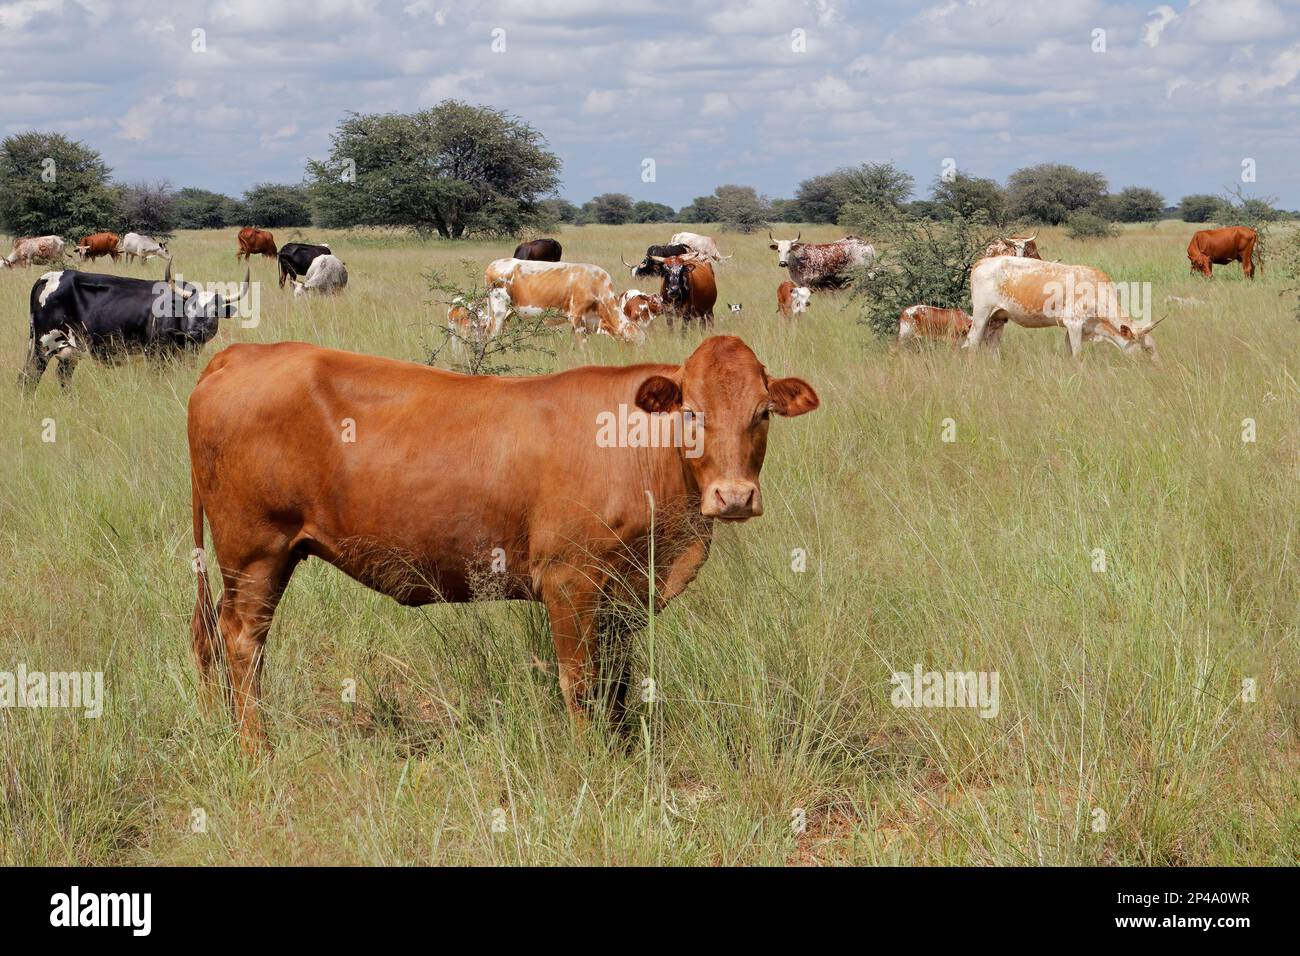 Herd of free-range cattle grazing in grassland on a rural farm, South Africa Stock Photo